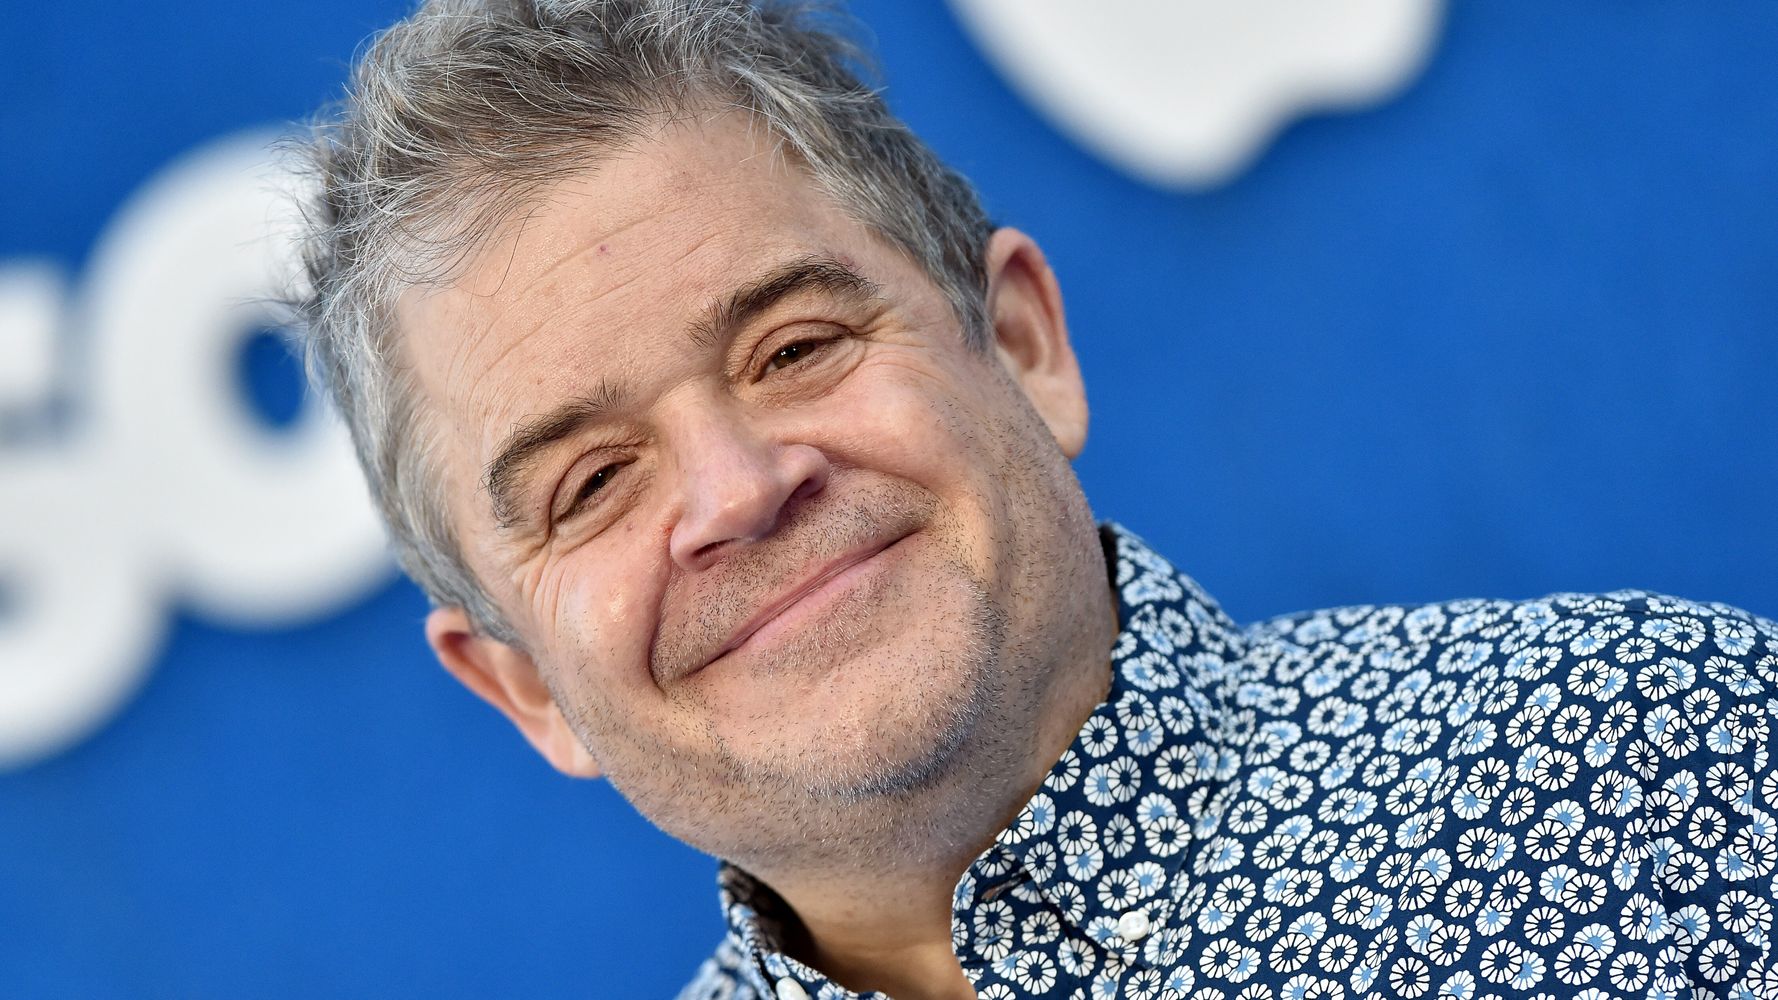 Patton Oswalt Brutally Says Why He Nixed Shows At Venues Ignoring COVID Precautions